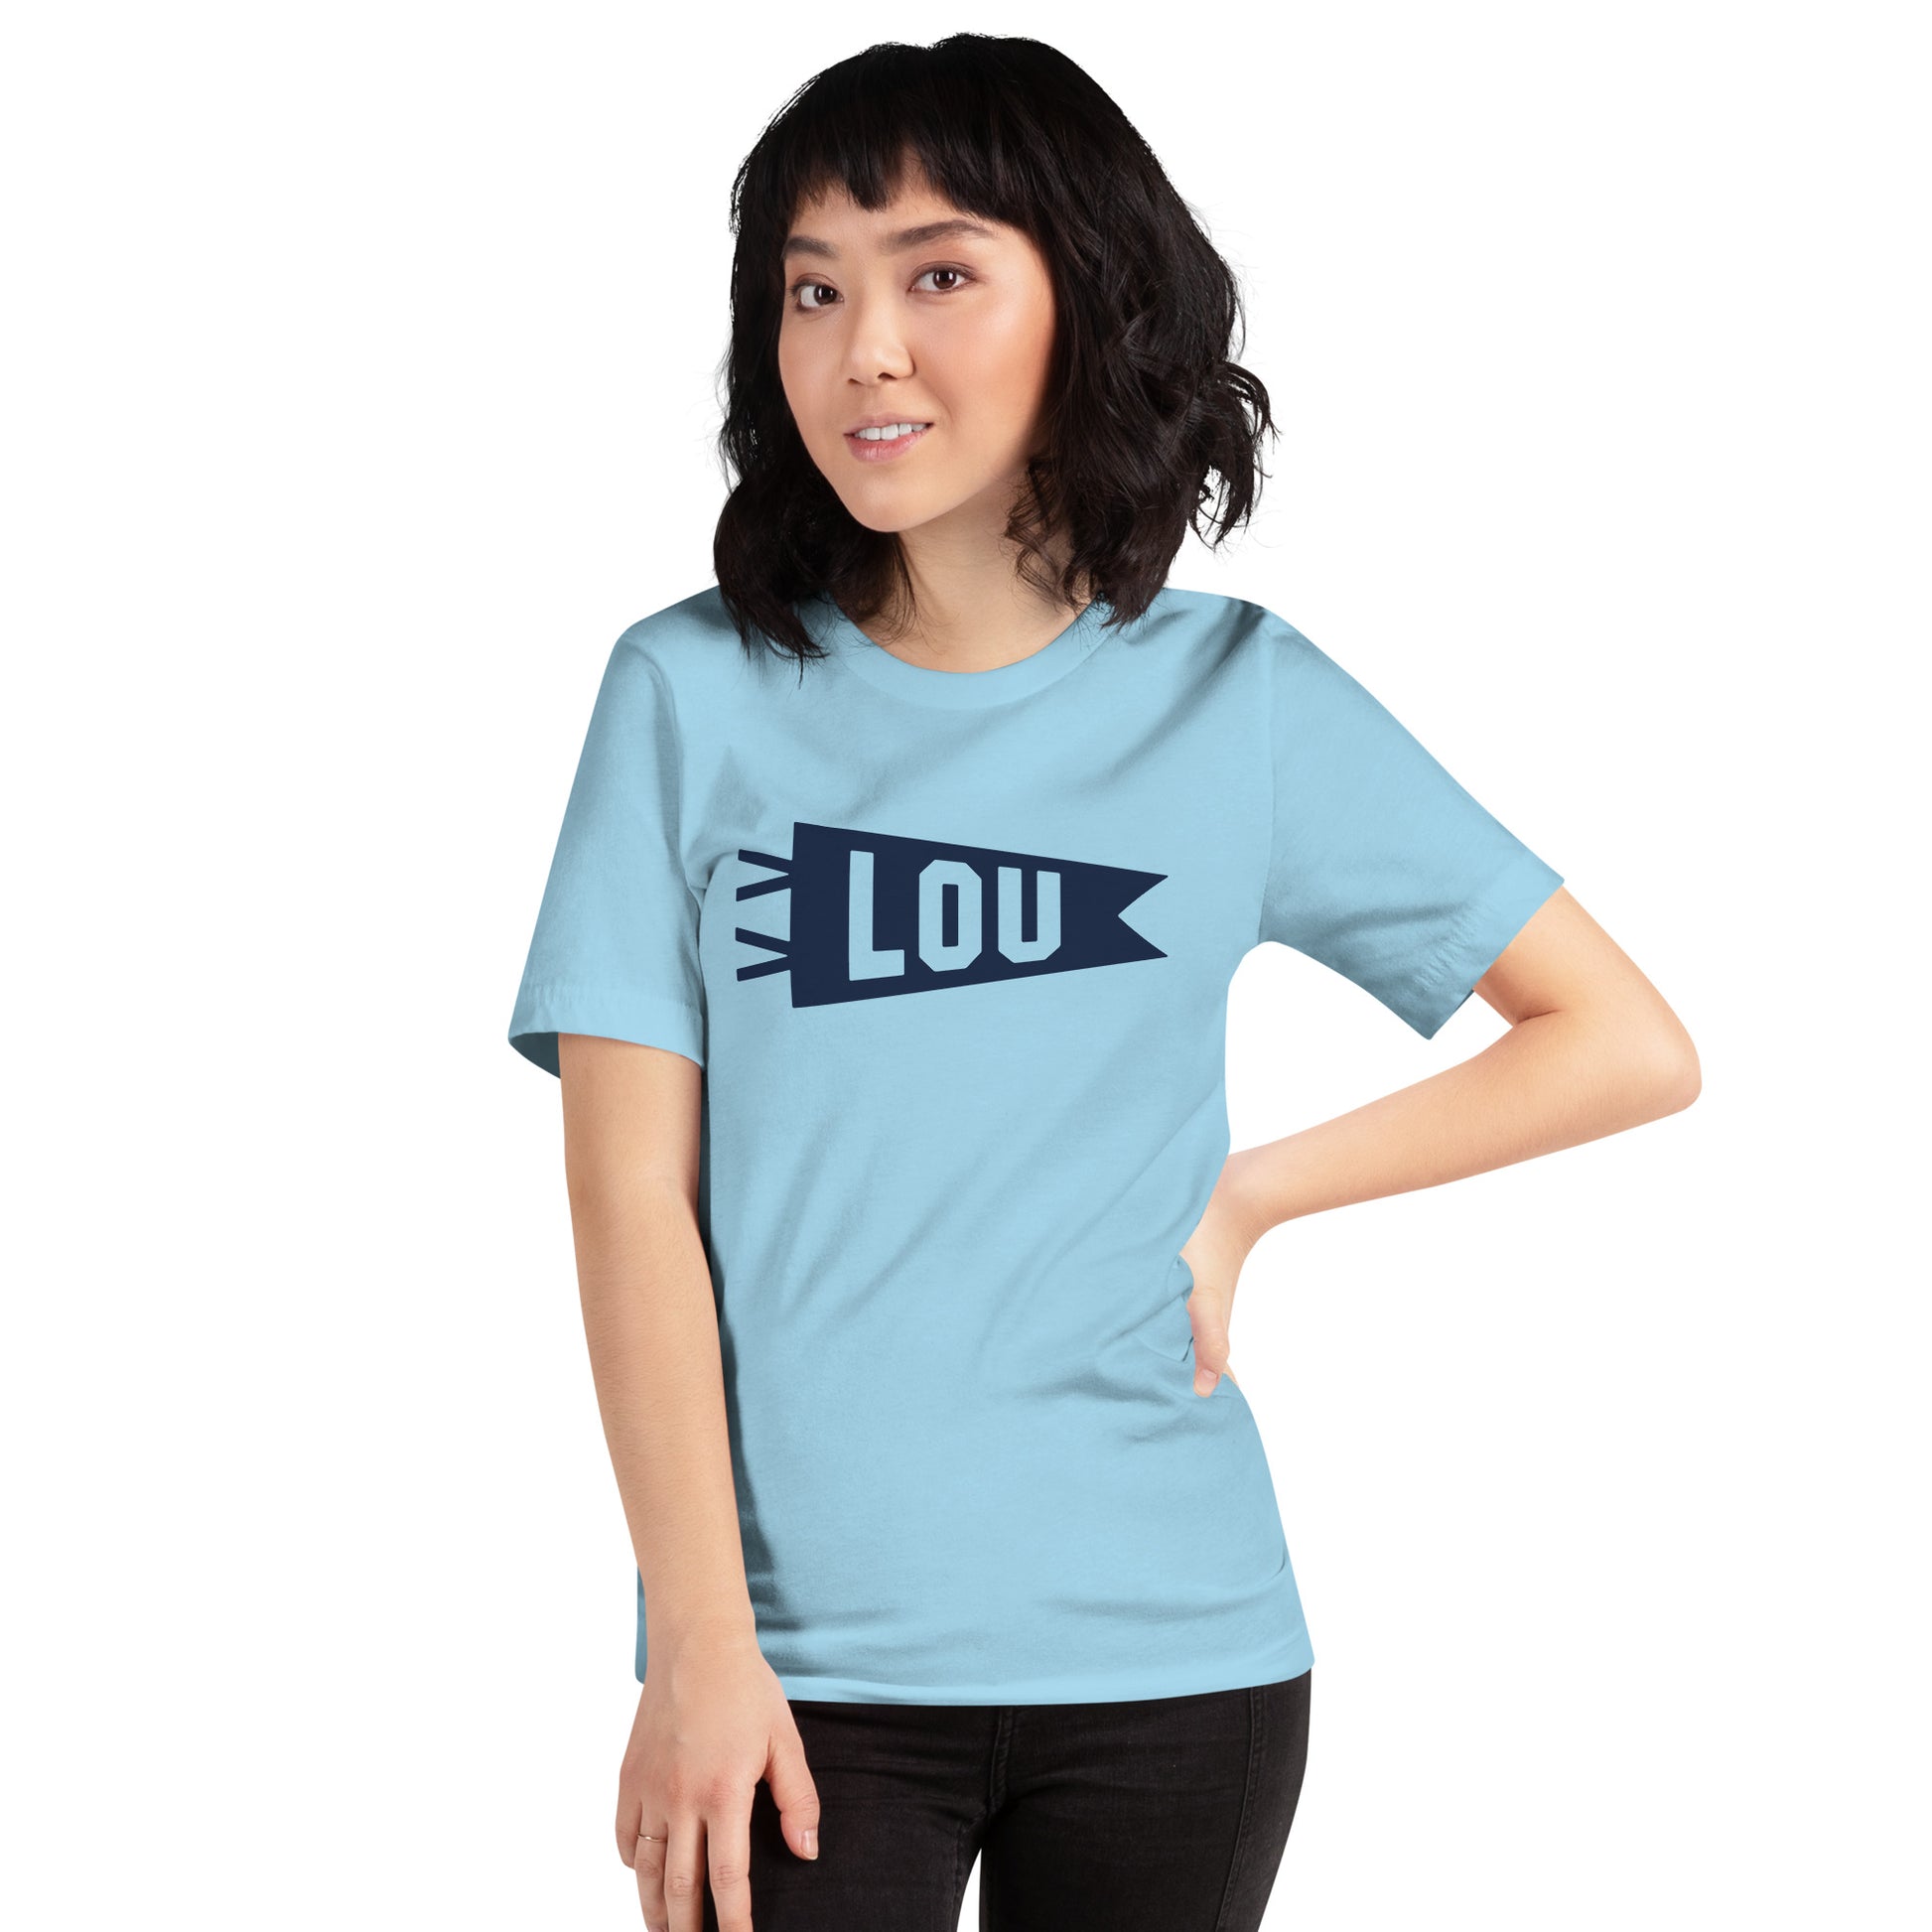 Airport Code T-Shirt - Navy Blue Graphic • LOU Louisville • YHM Designs - Image 09